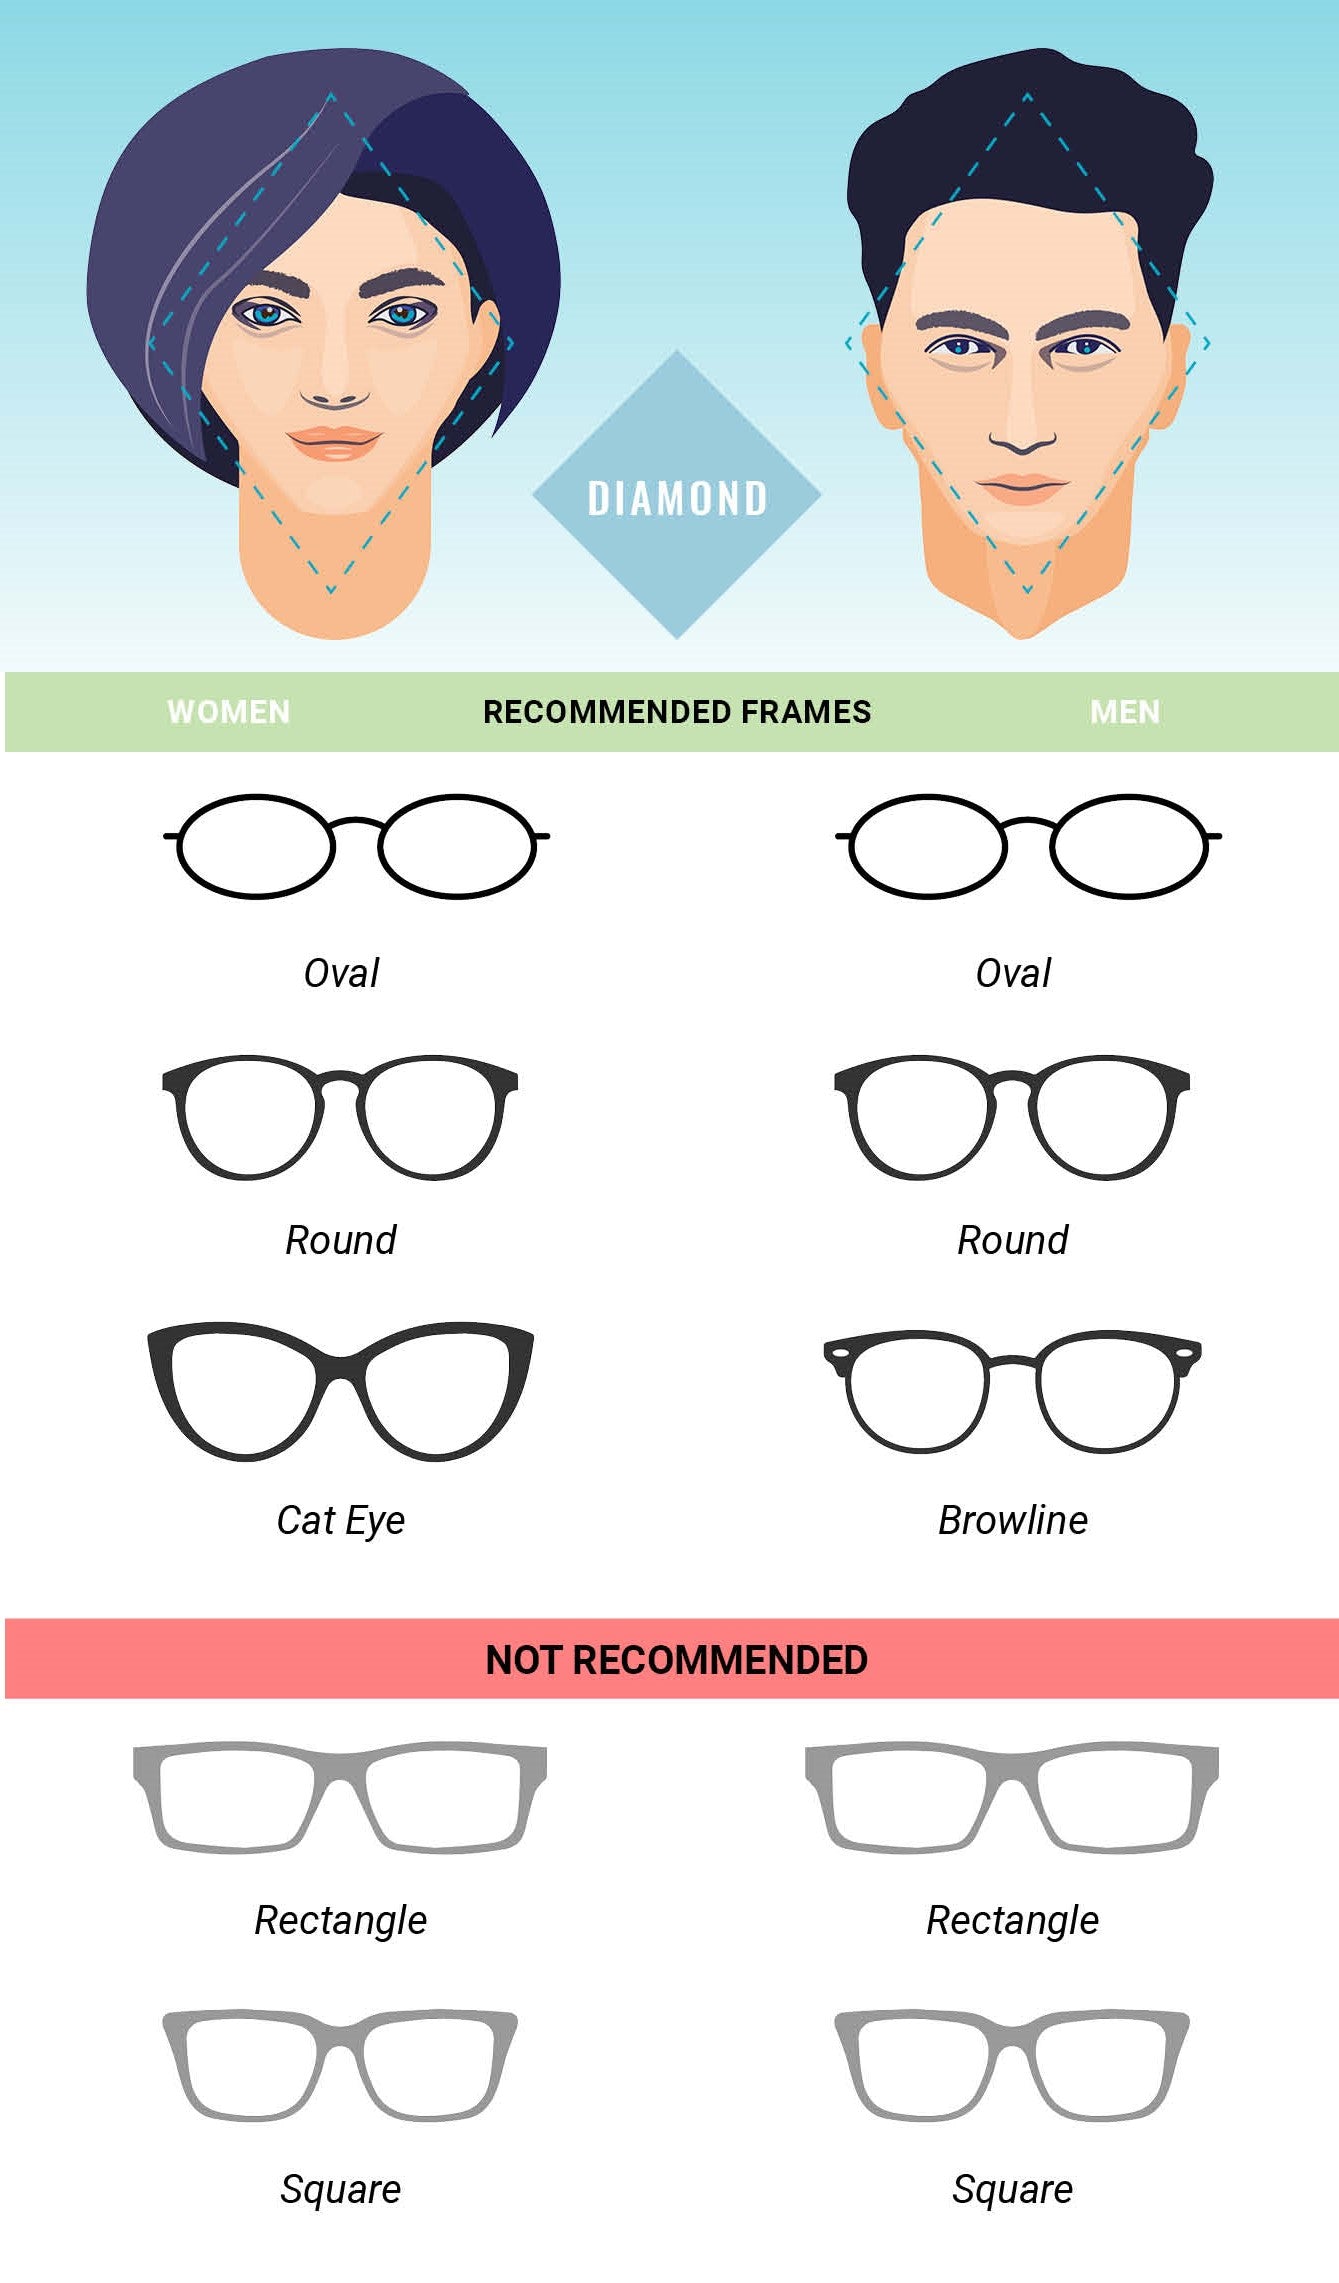 Eyeglass frame recommendations for diamond face shapes for men and women